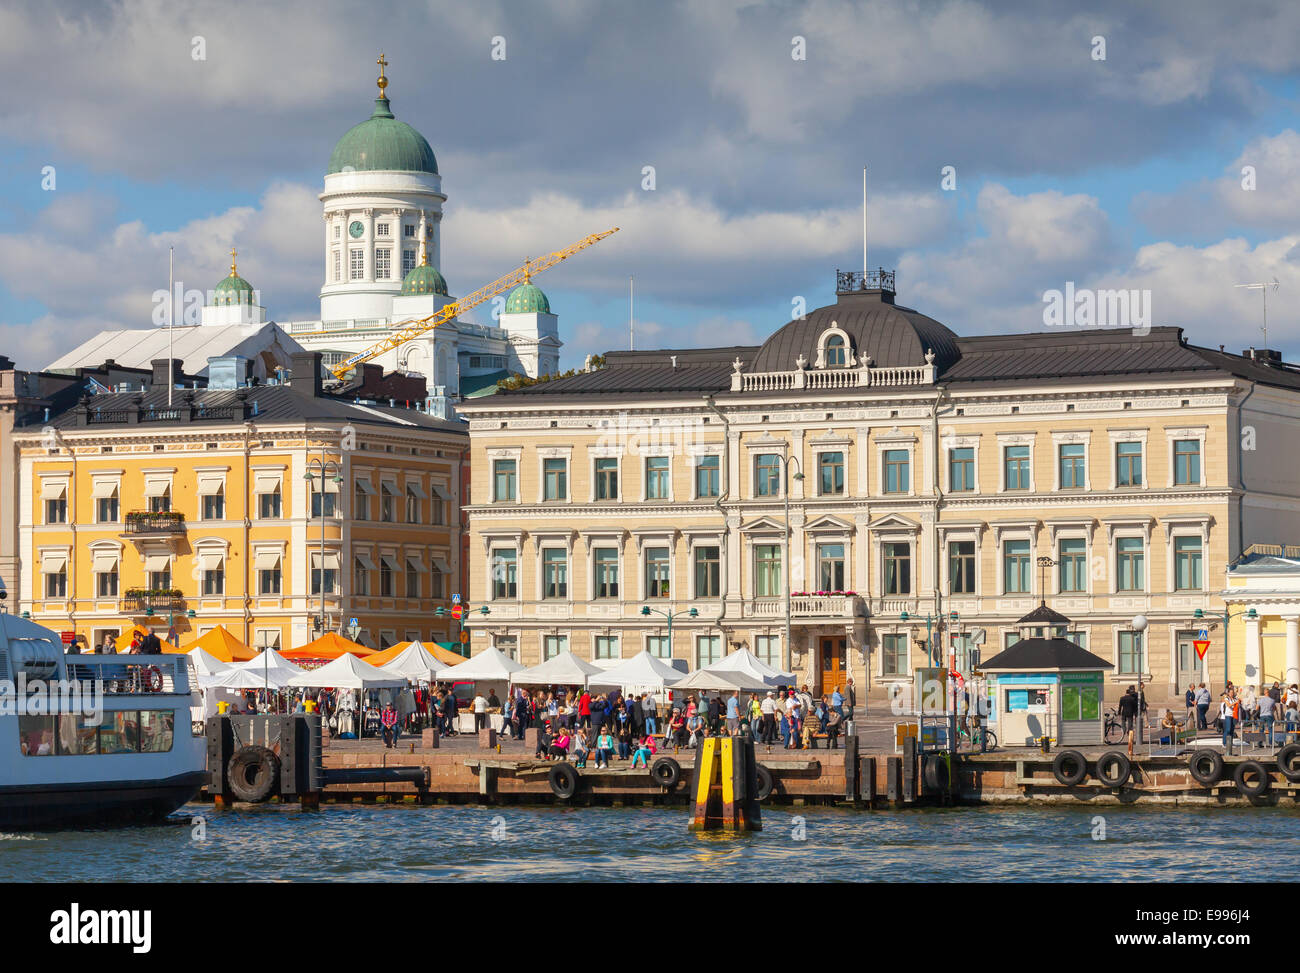 HELSINKI, FINLAND - SEPTEMBER 13, 2014: central quay of Helsinki with ships, walking people and dome of the main city cathedral Stock Photo